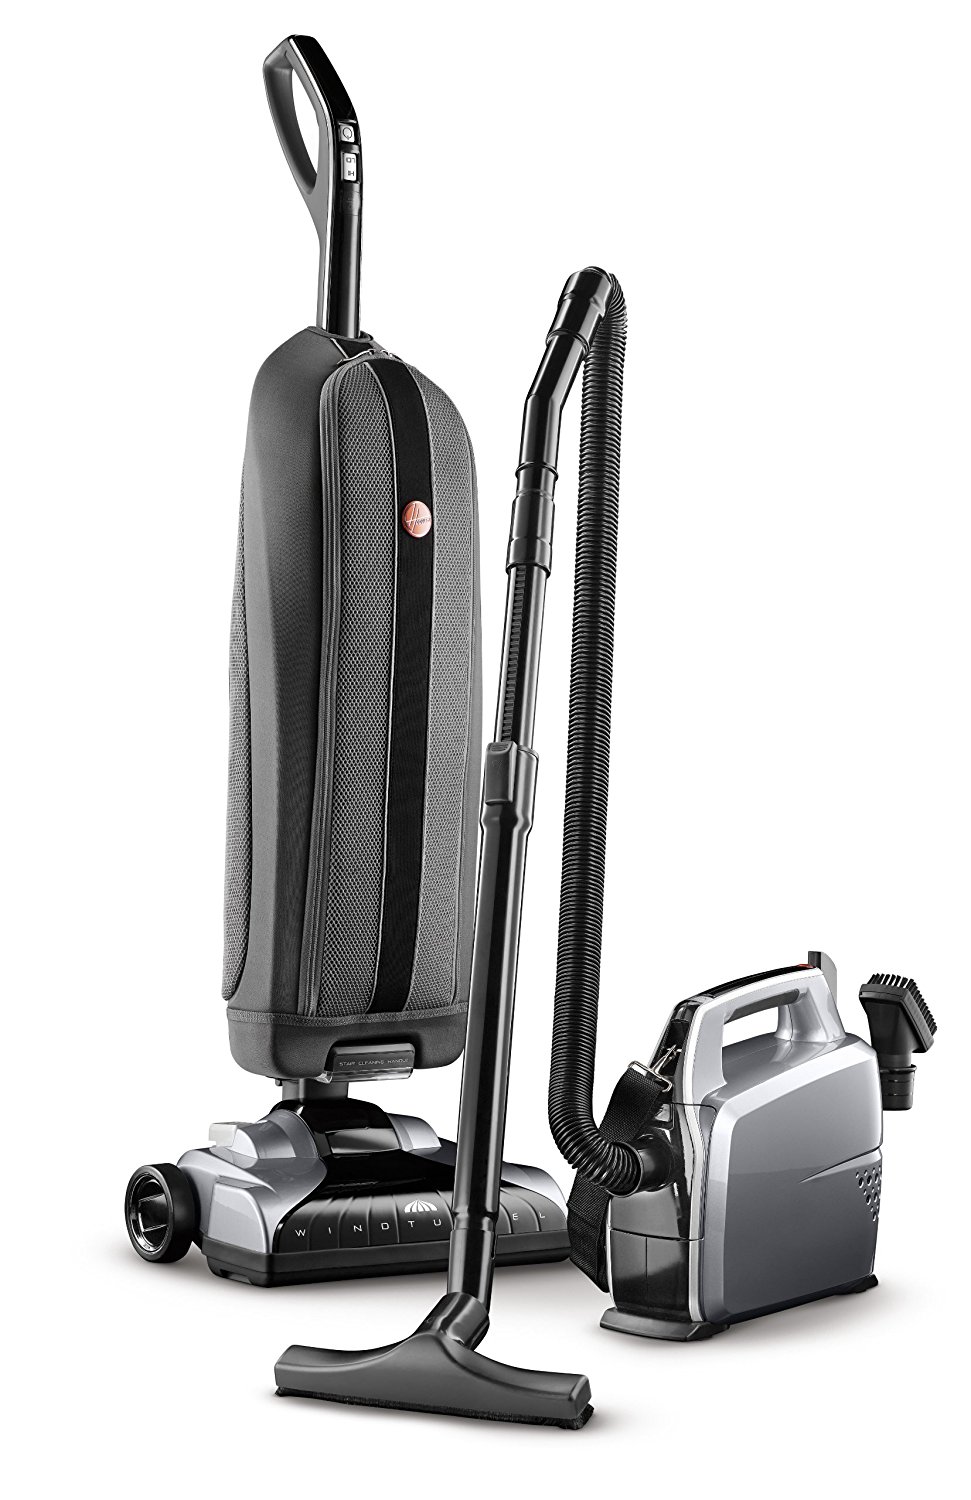 Hoover Platinum Collection Bagged Corded Upright Vacuum with Canister Vacuum Cleaner UH3001COM